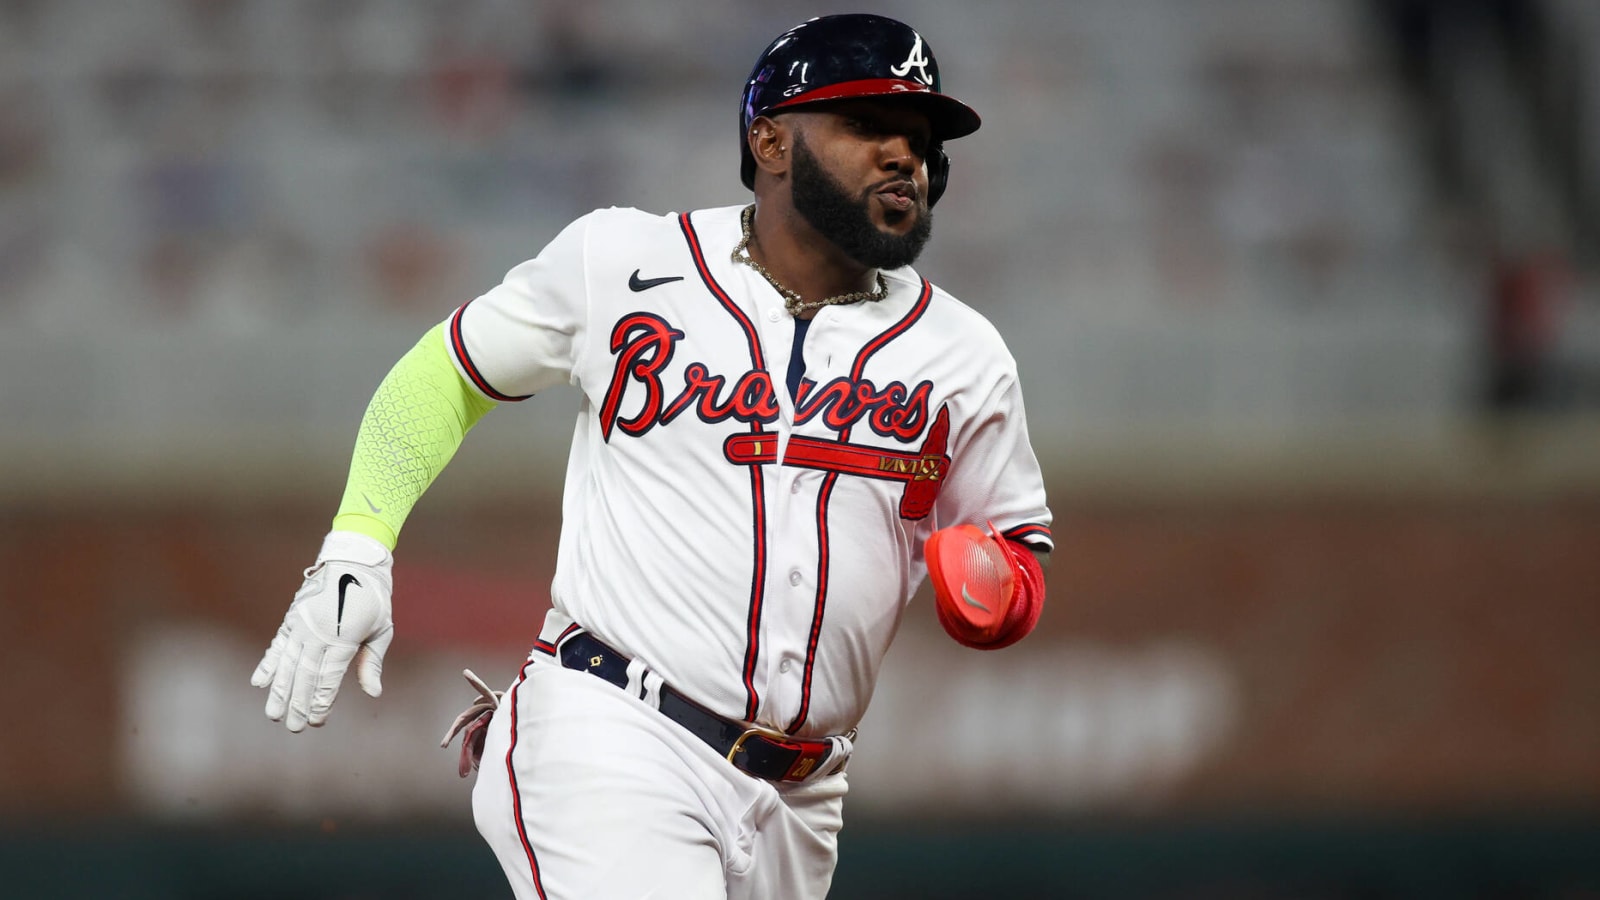 Marcell Ozuna has put together a nice spring for the Atlanta Braves